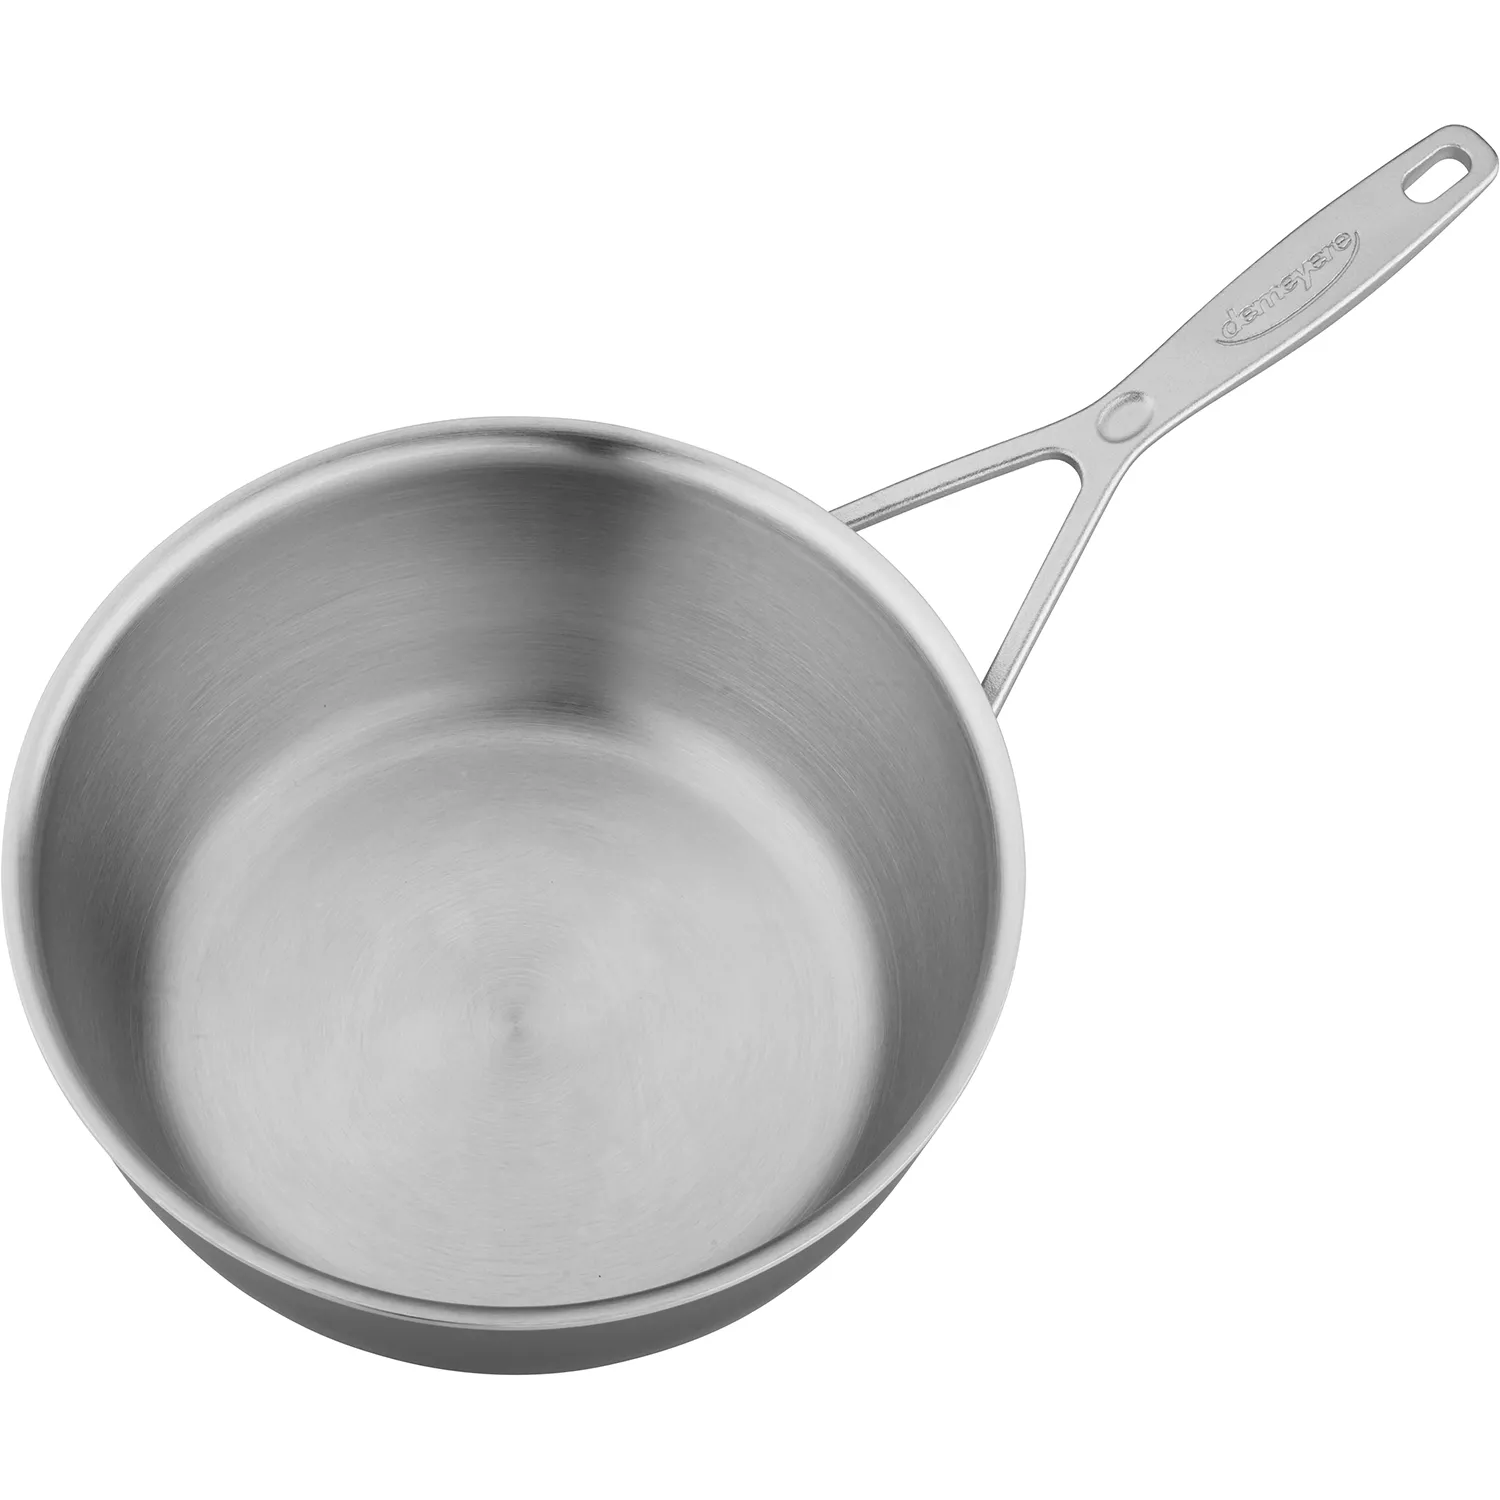 Photos - Stockpot Demeyere Industry5 Stainless Steel Saucepan With Lid 48420-48520 